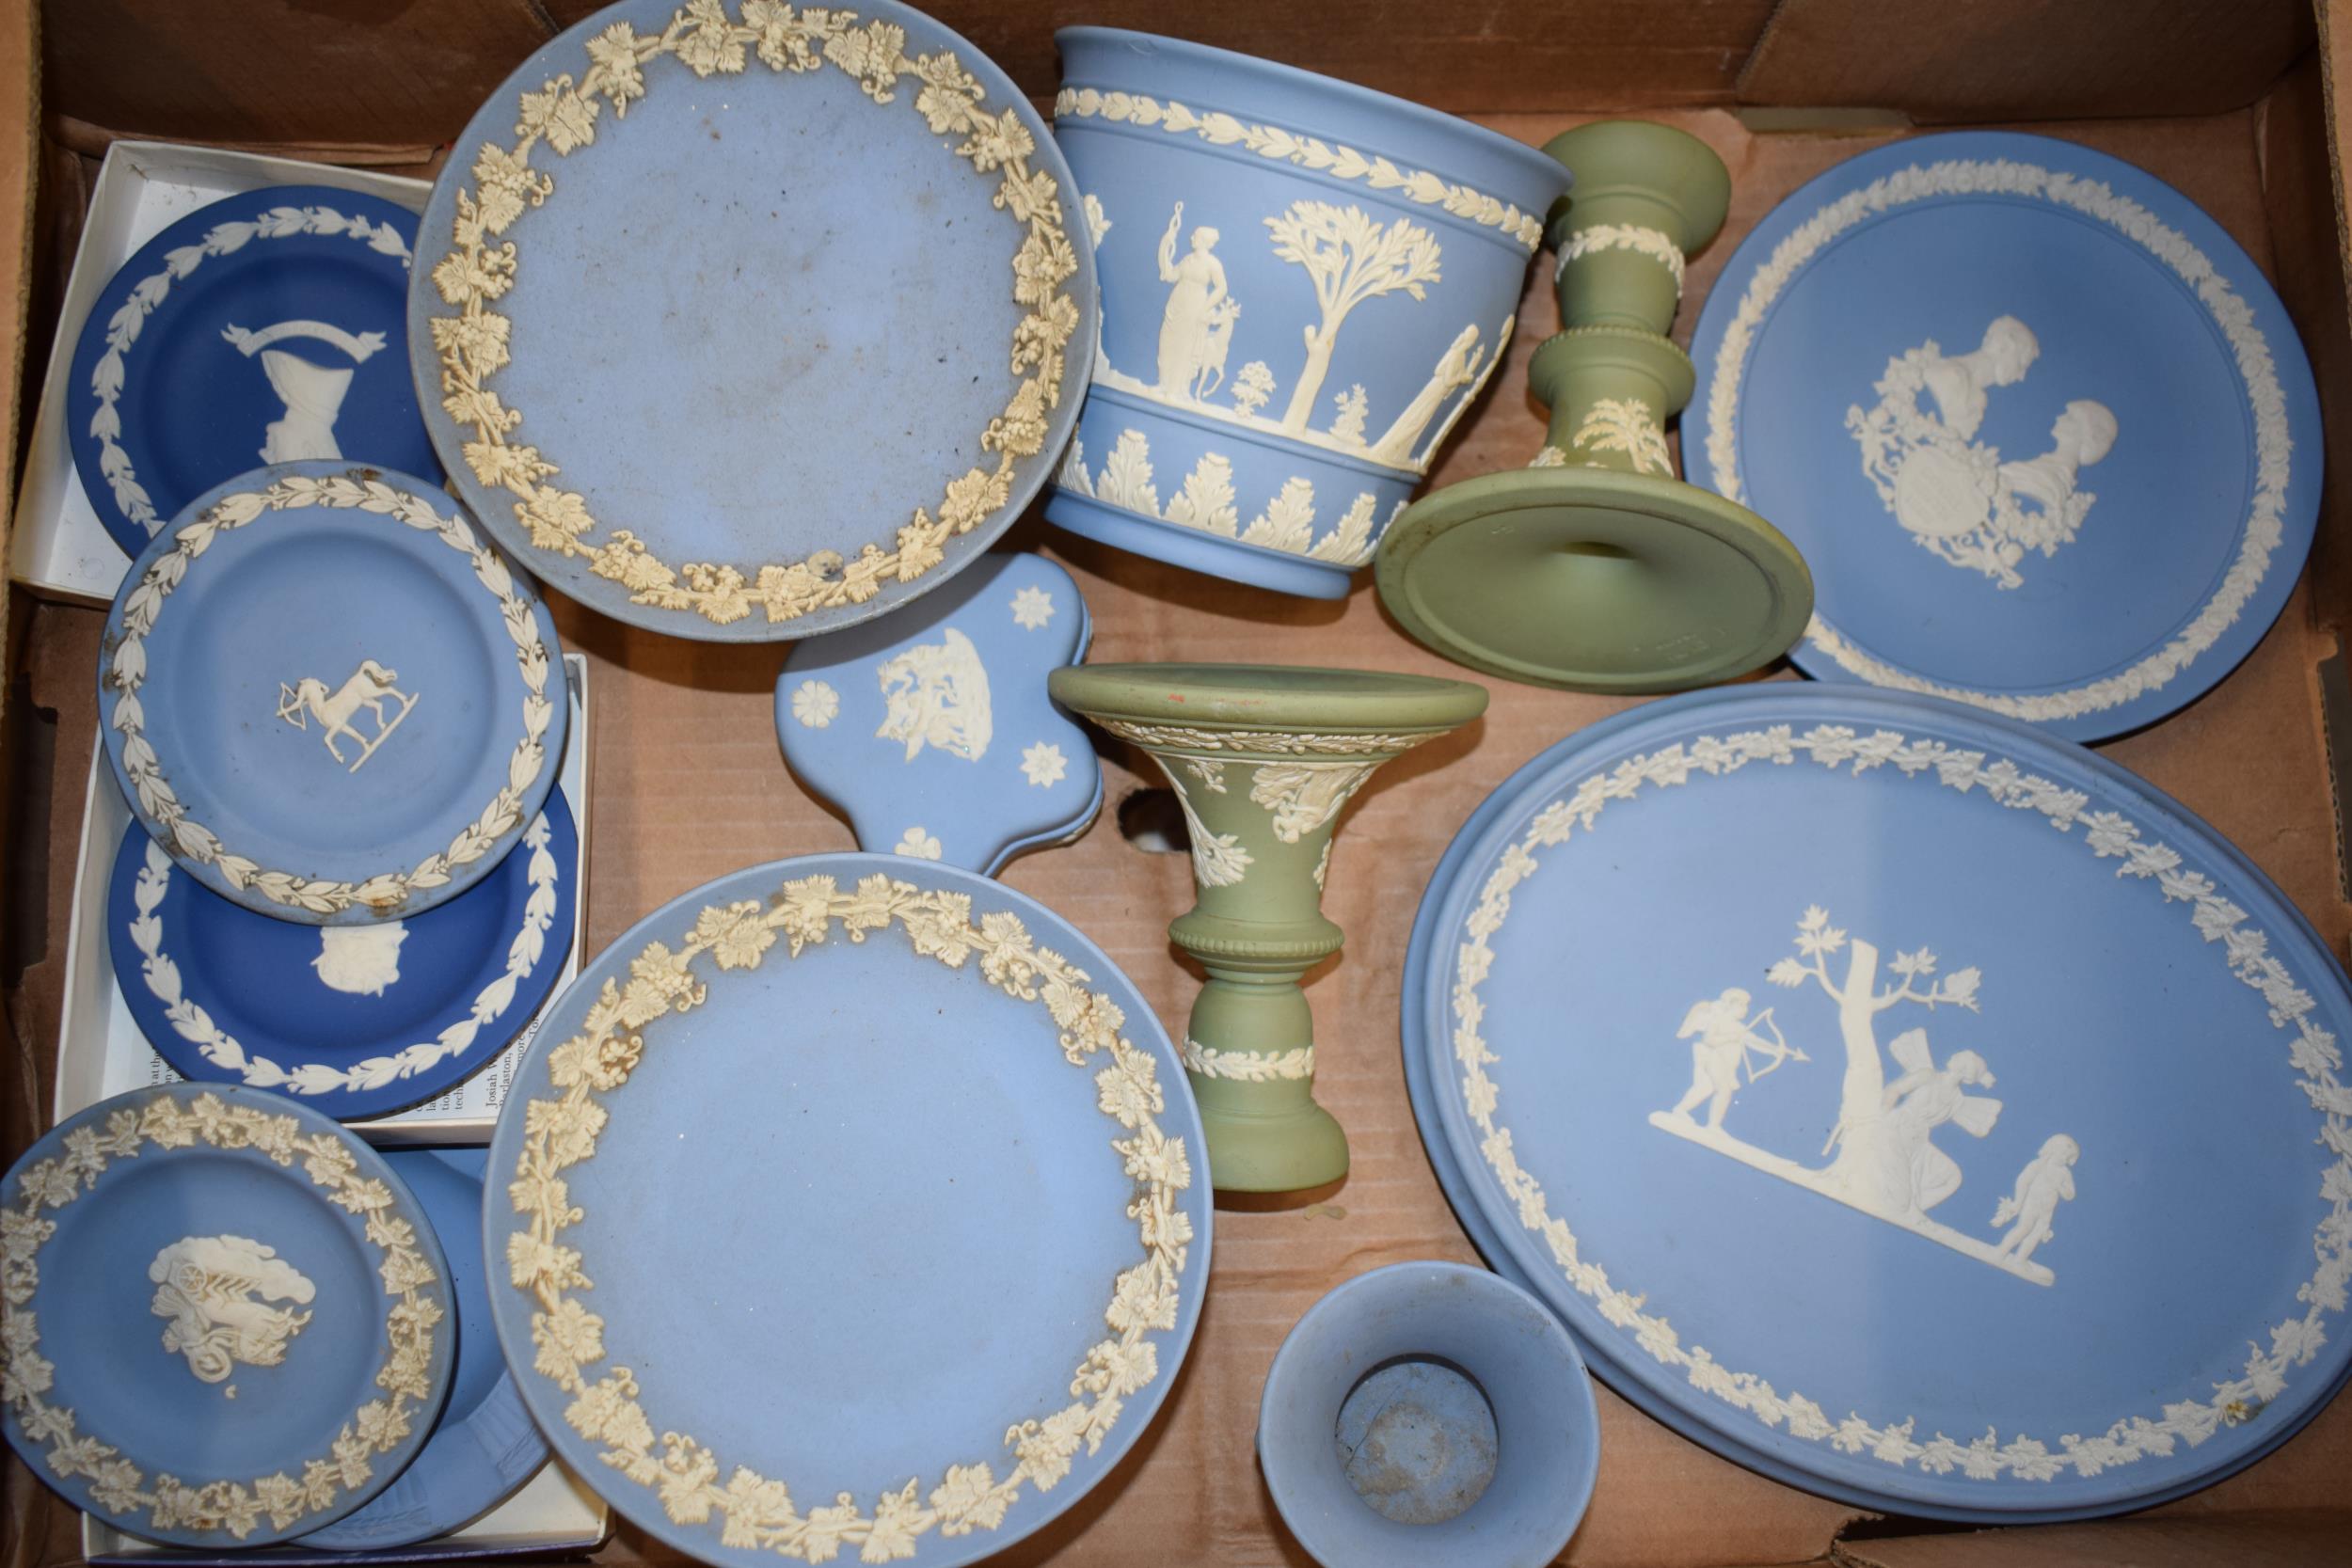 Wedgwood Jasperware in green and blue to include a pair of candlesticks, tazzas, vases, an oval